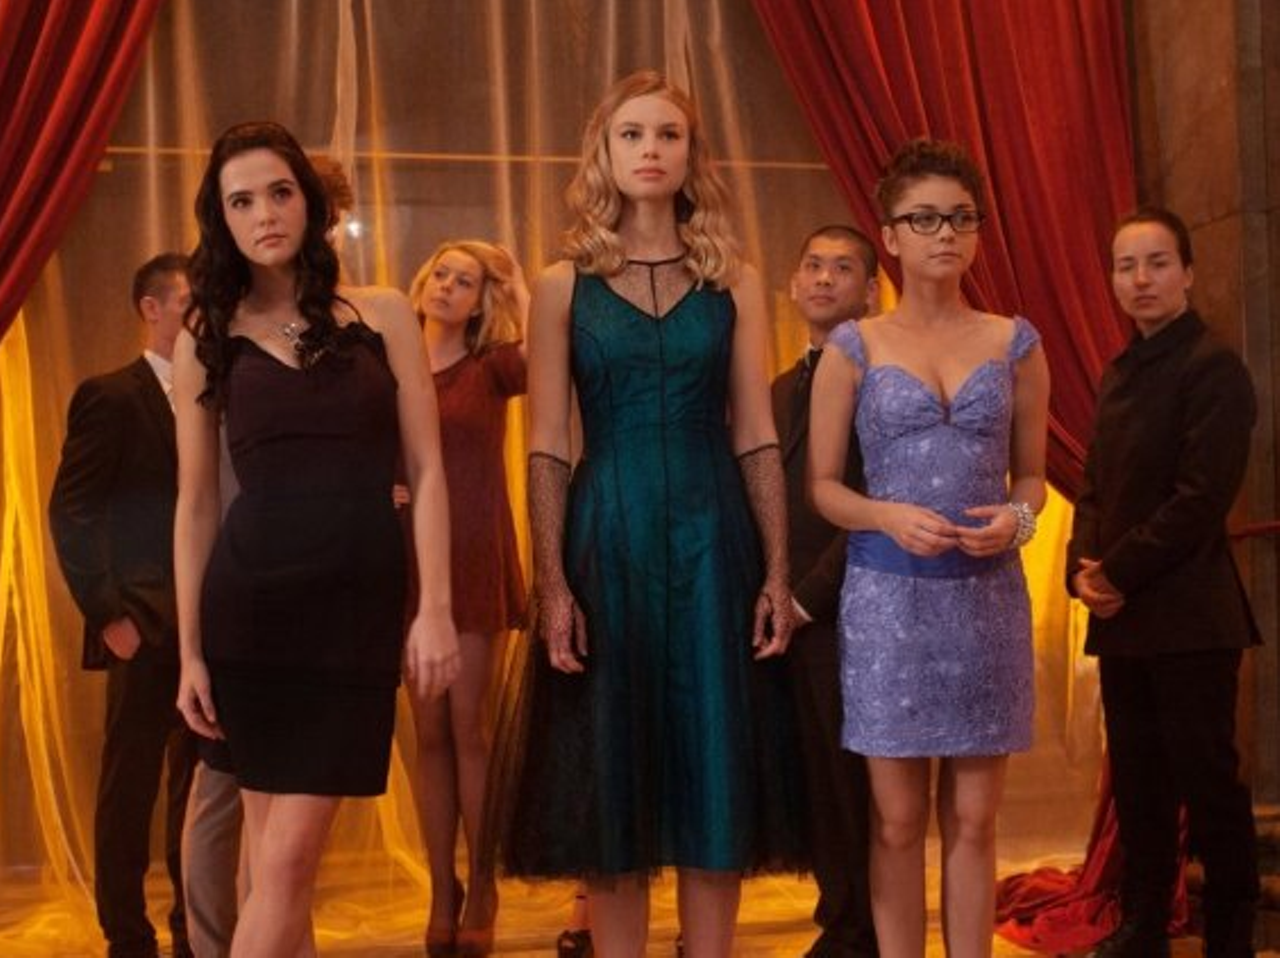 17. Vampire Academy (2014)
Consider this: Director Mark Waters helmed Mean Girls, and screenwriter Daniel Waters penned Heathers. People dismiss films about teen girls, as though that audience's agonies and fears and passions are forever lesser than those of a grown man in tights. But the Waters brothers' work can't be tossed aside. Like their earlier comedies, Vampire Academy nimbly balances teen paranoia with real threats (here, the deadly Strigoi clan of bloodsuckers, who want to chew up the school). And it knows that friendship -- not romance -- is a 17-year-old girl's true obsession. Best friendship can be all-consuming, even dangerous. It can explode. But after the debris settles, it'll still rank first. -- Amy Nicholson